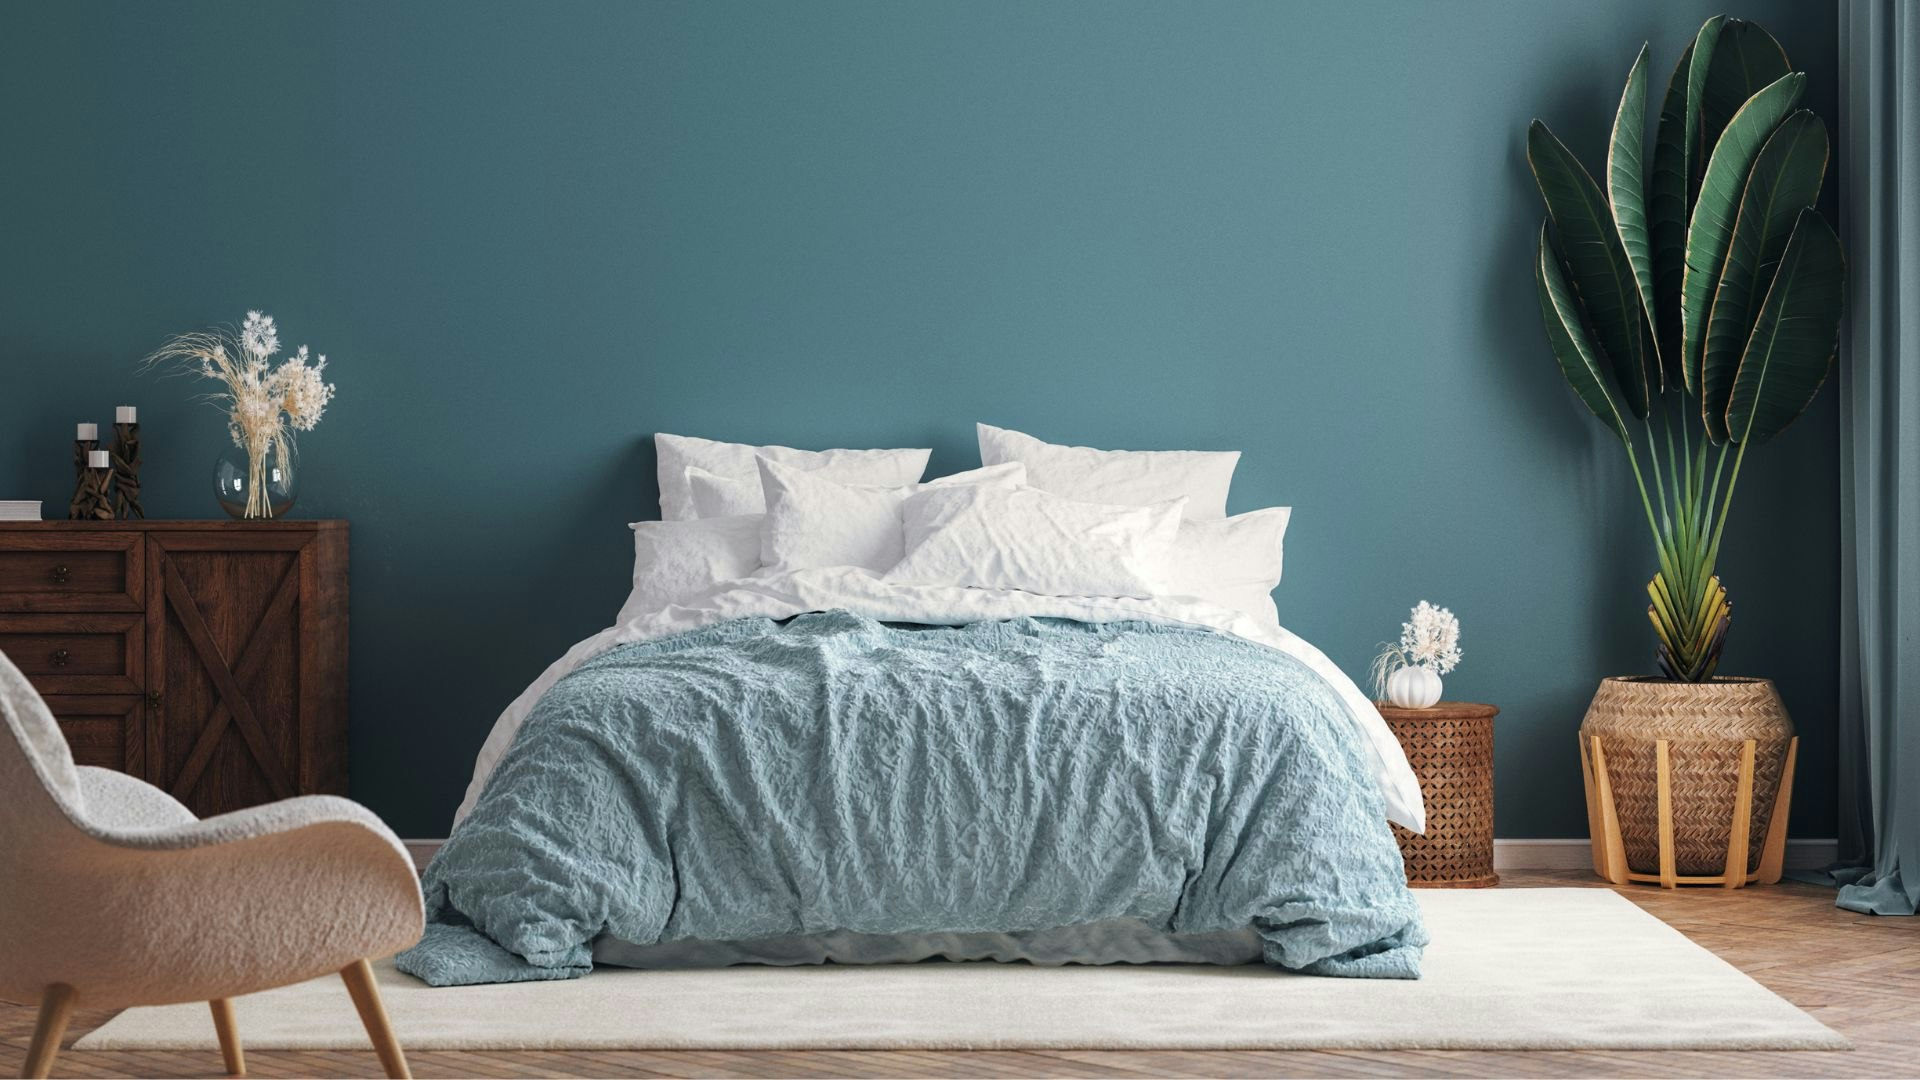 Navy bedroom ideas: Mixing blue bedding with blue walls